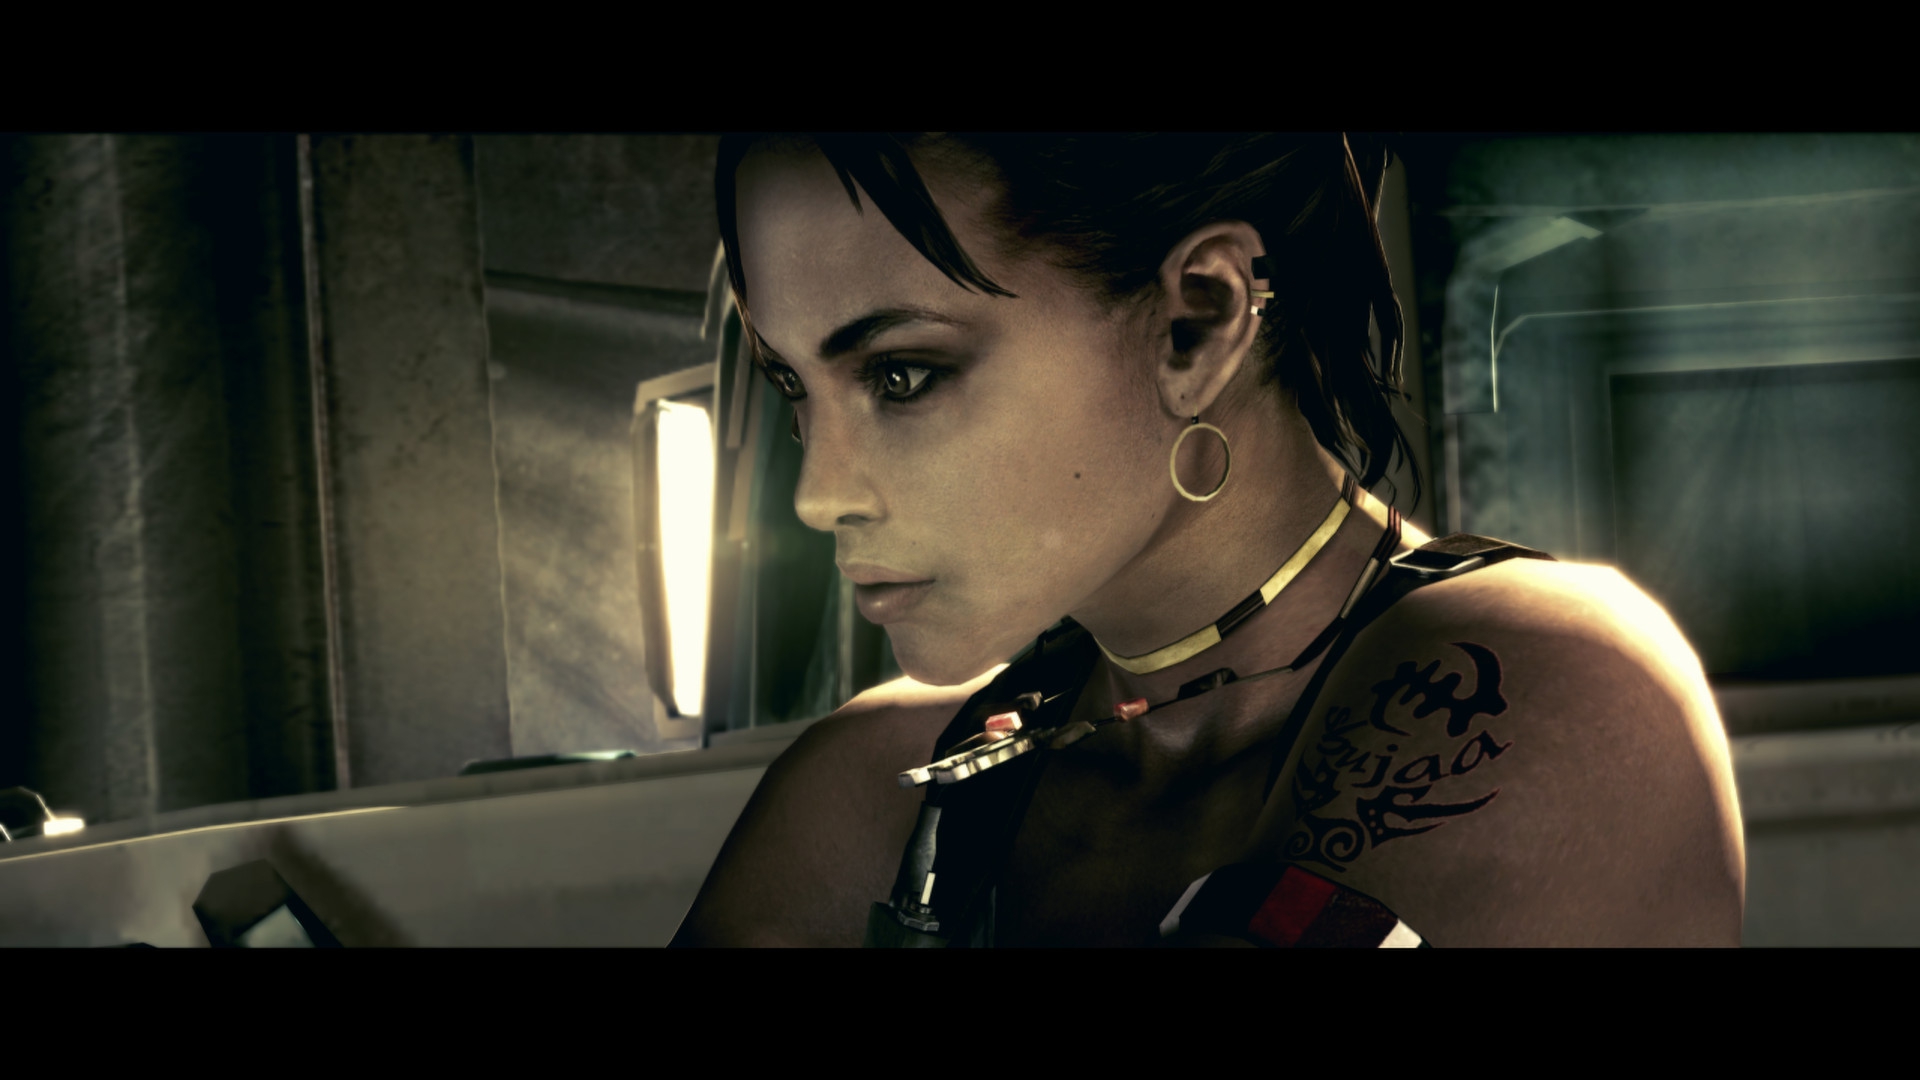 Resident Evil 5 System Requirements